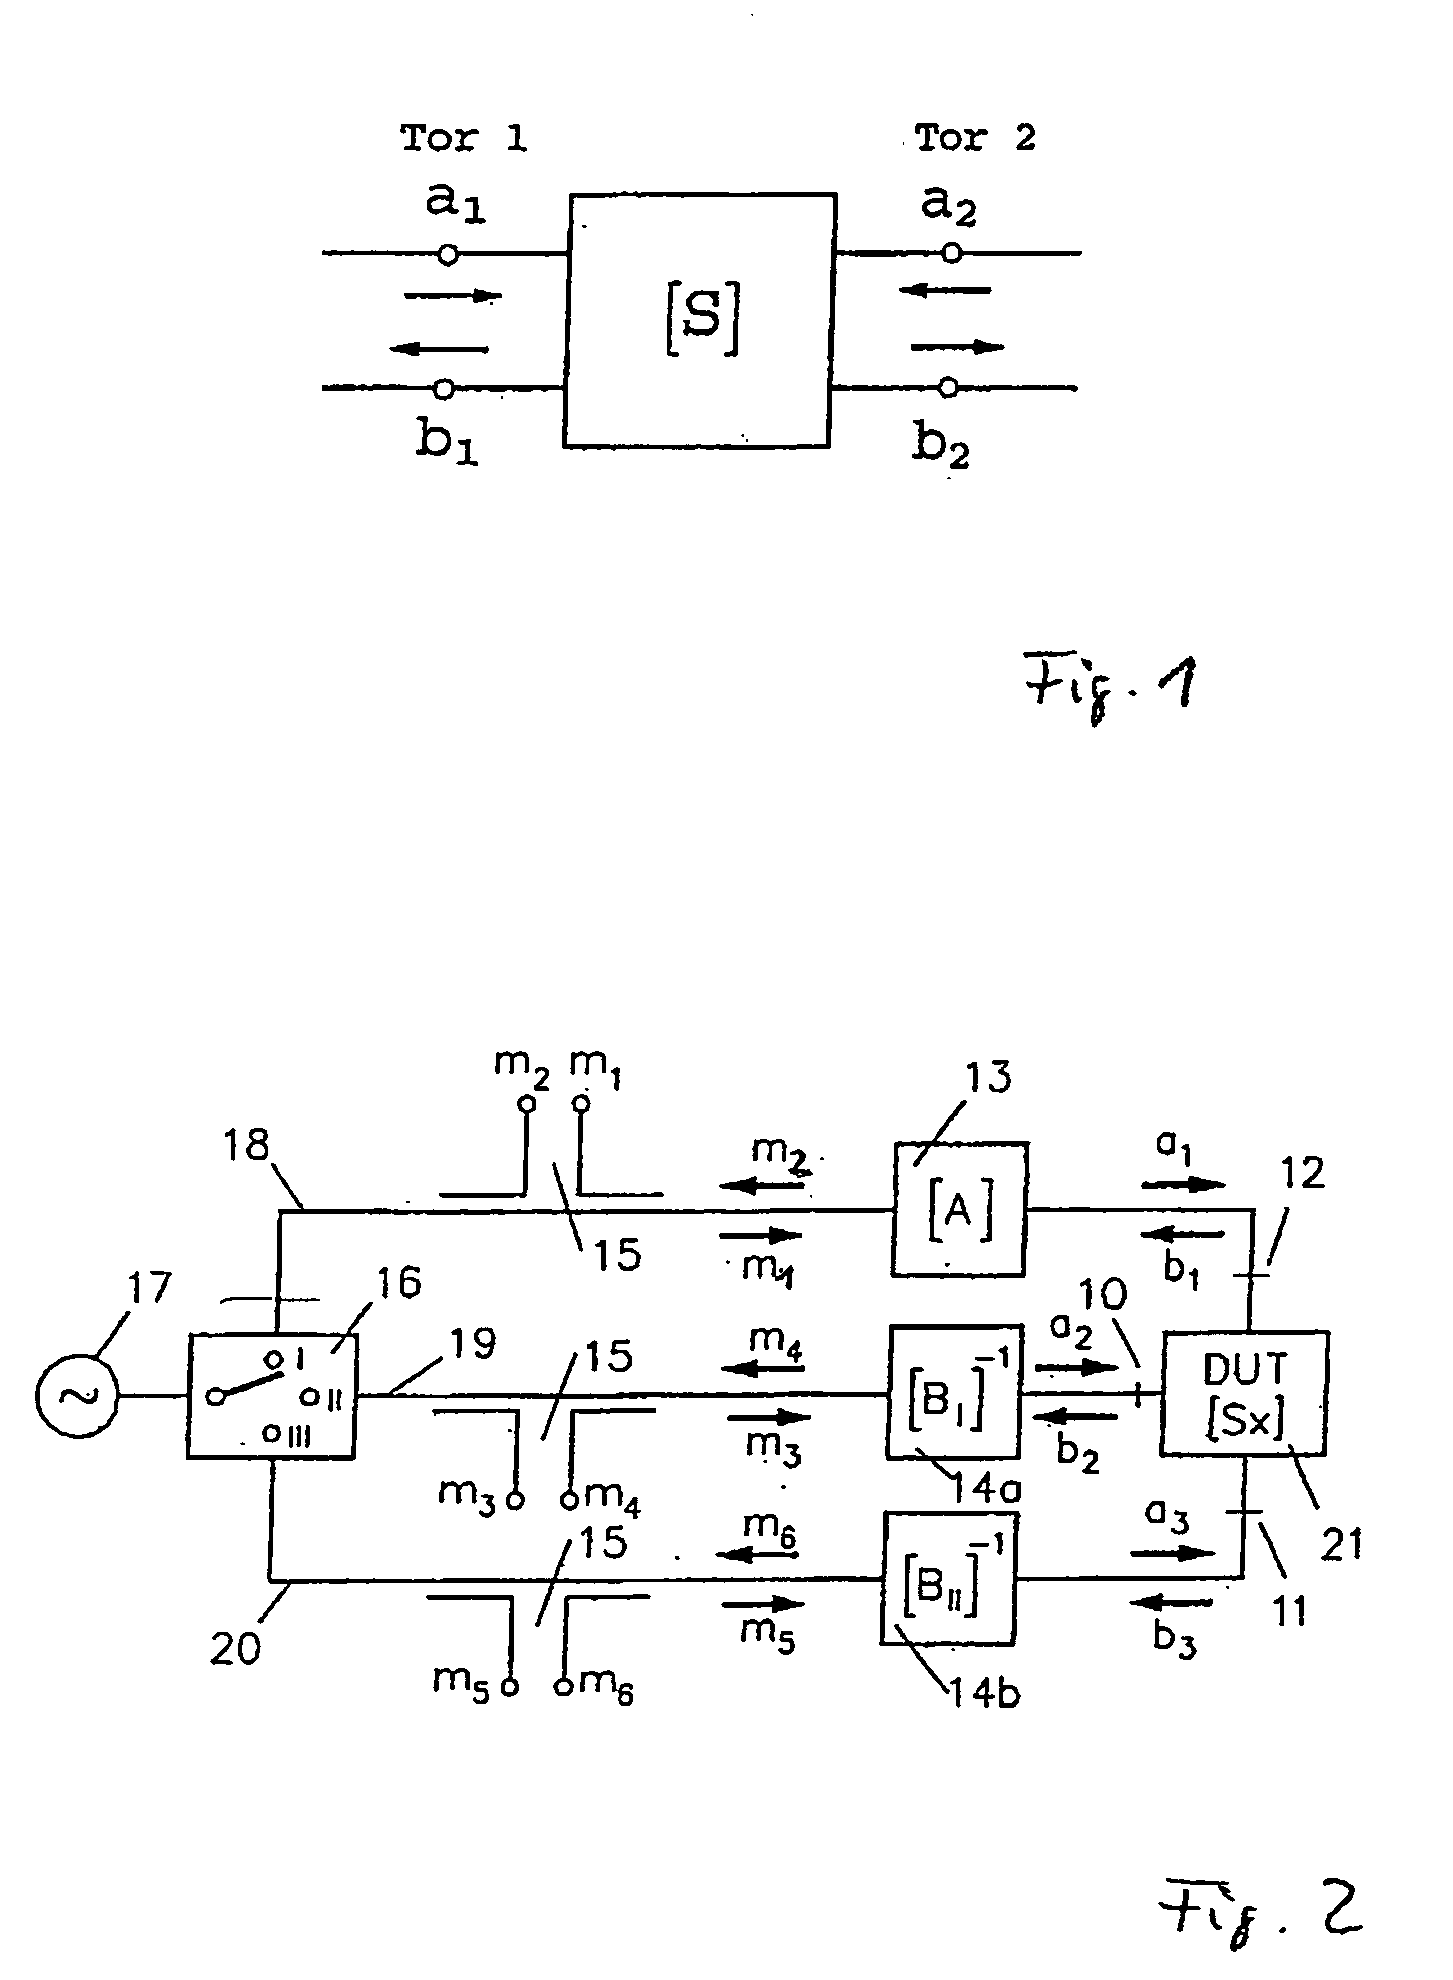 Calibration method for carrying out multiport measurements on semiconductor wafers